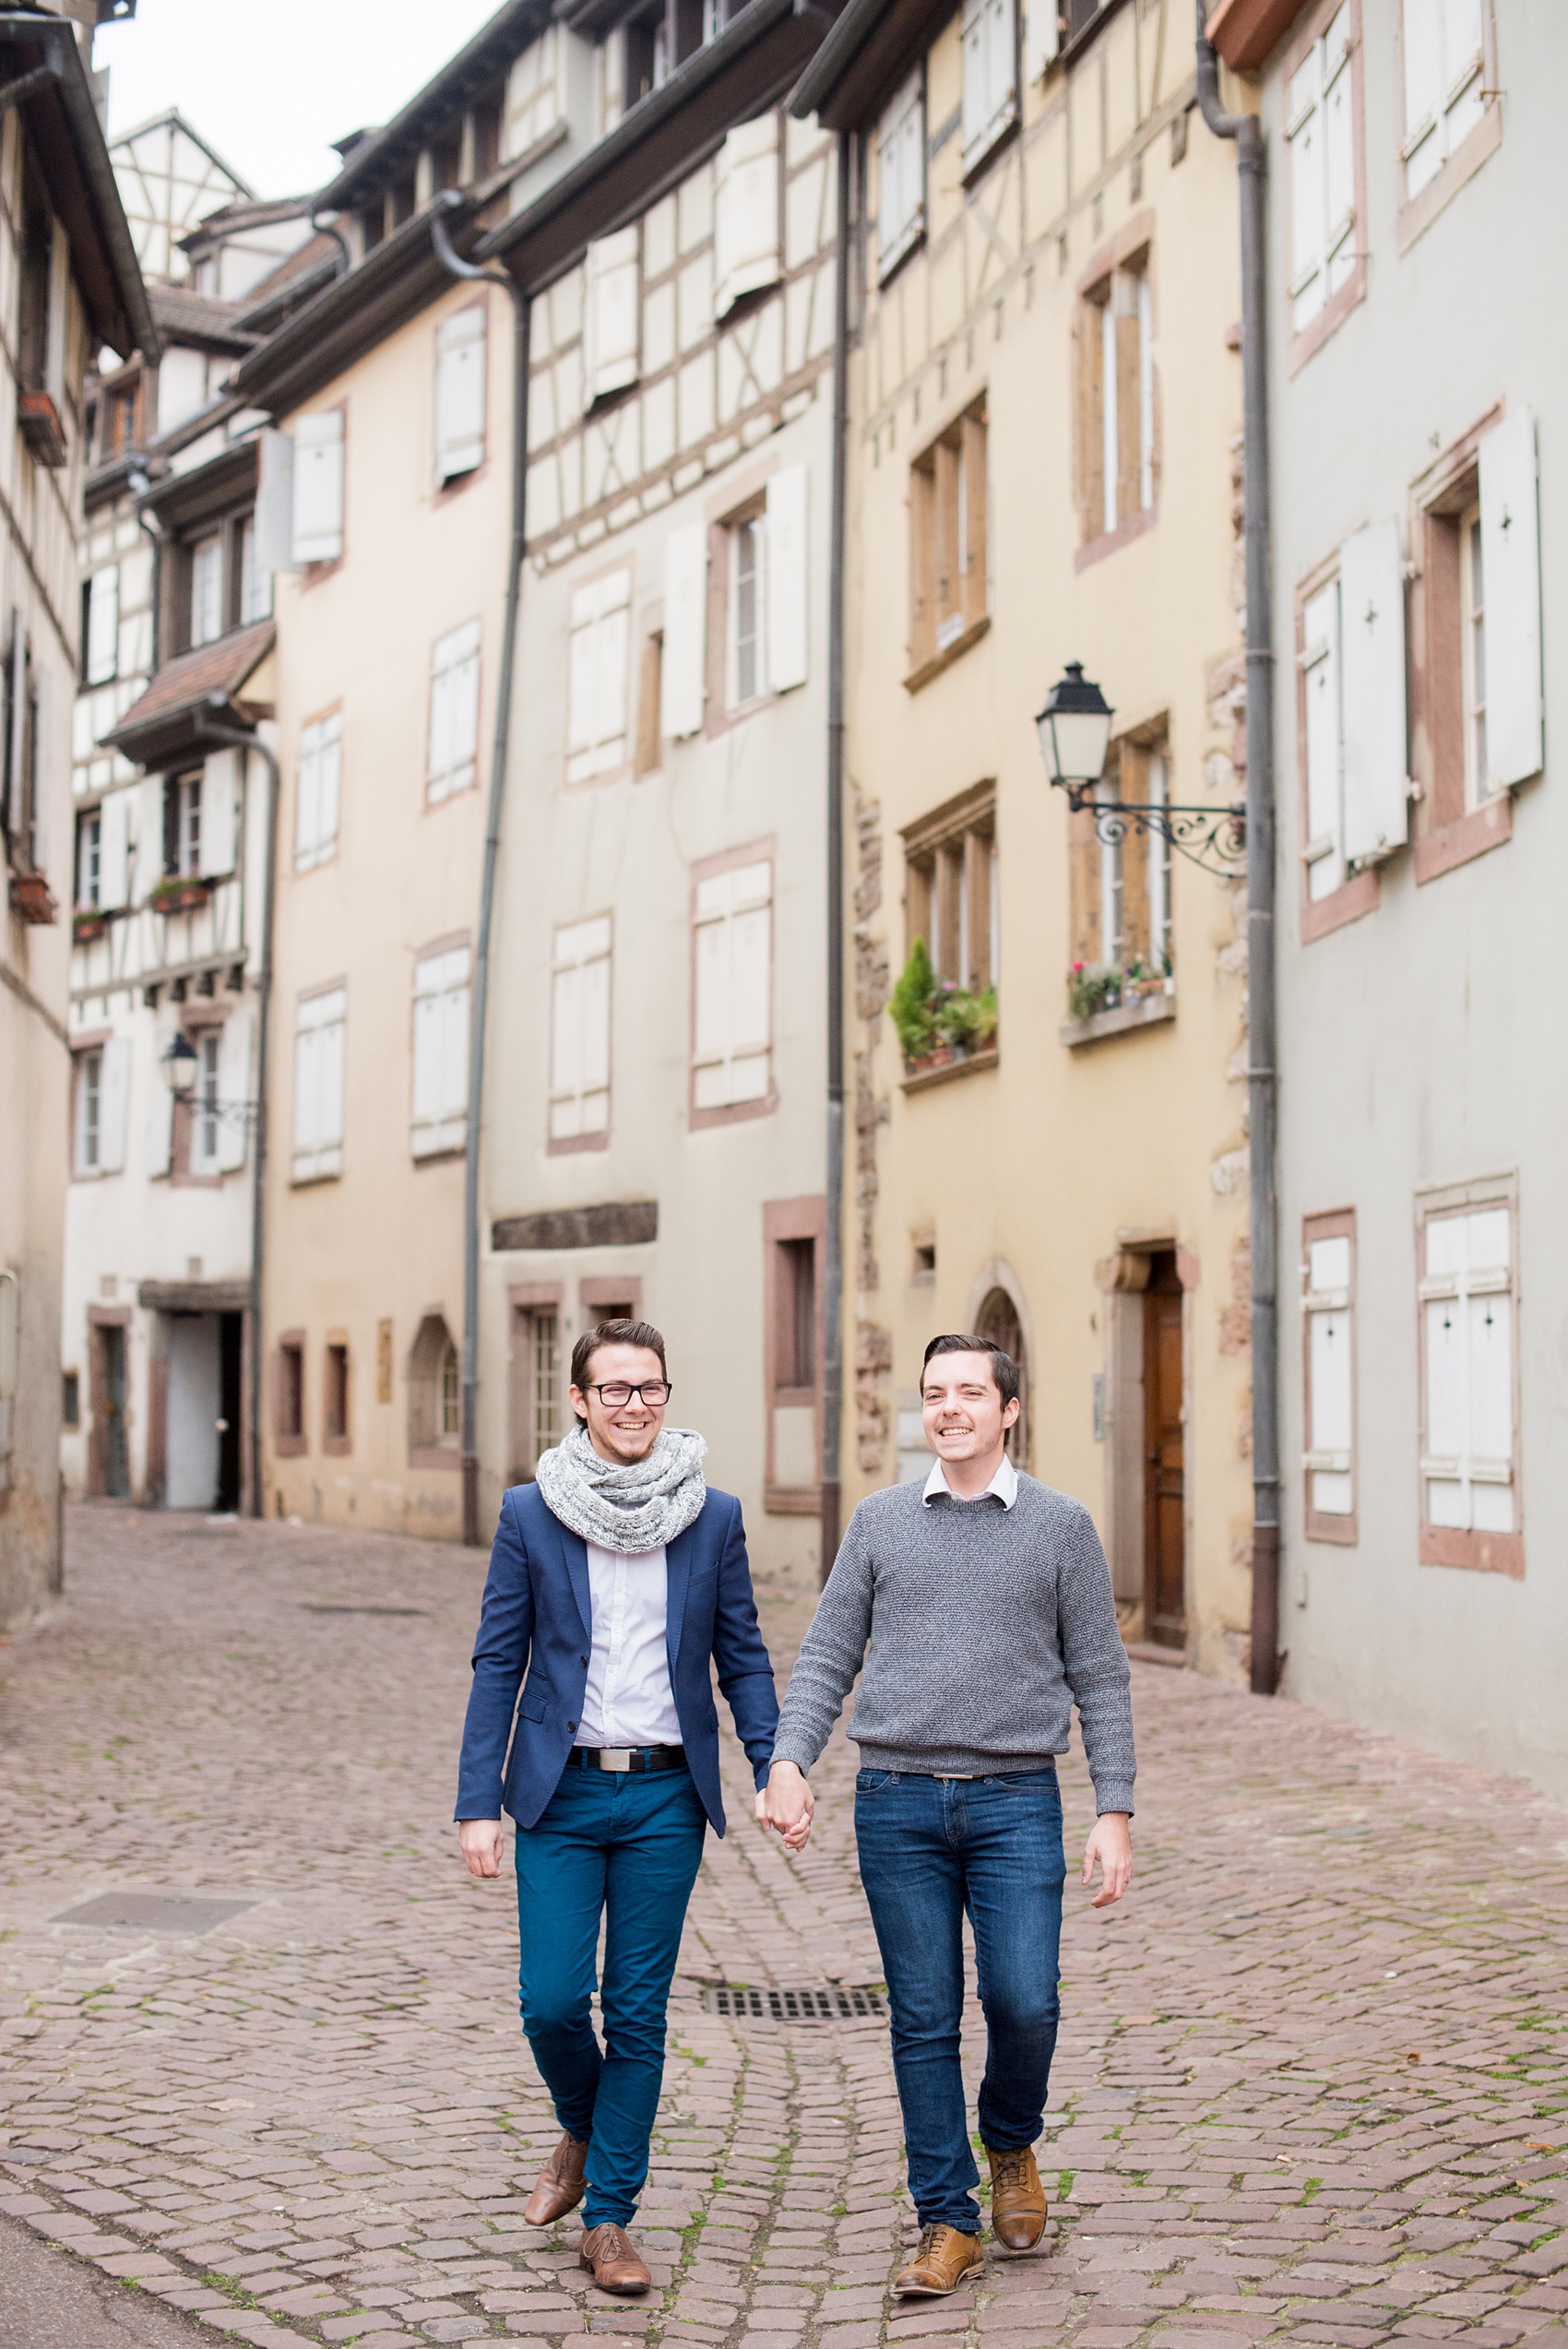 Mikkel Paige Photography pictures of an engagement session in Colmar, France in the Alsace region. Photo of the same sex couple walking through the cobblestone streets of the historic village.